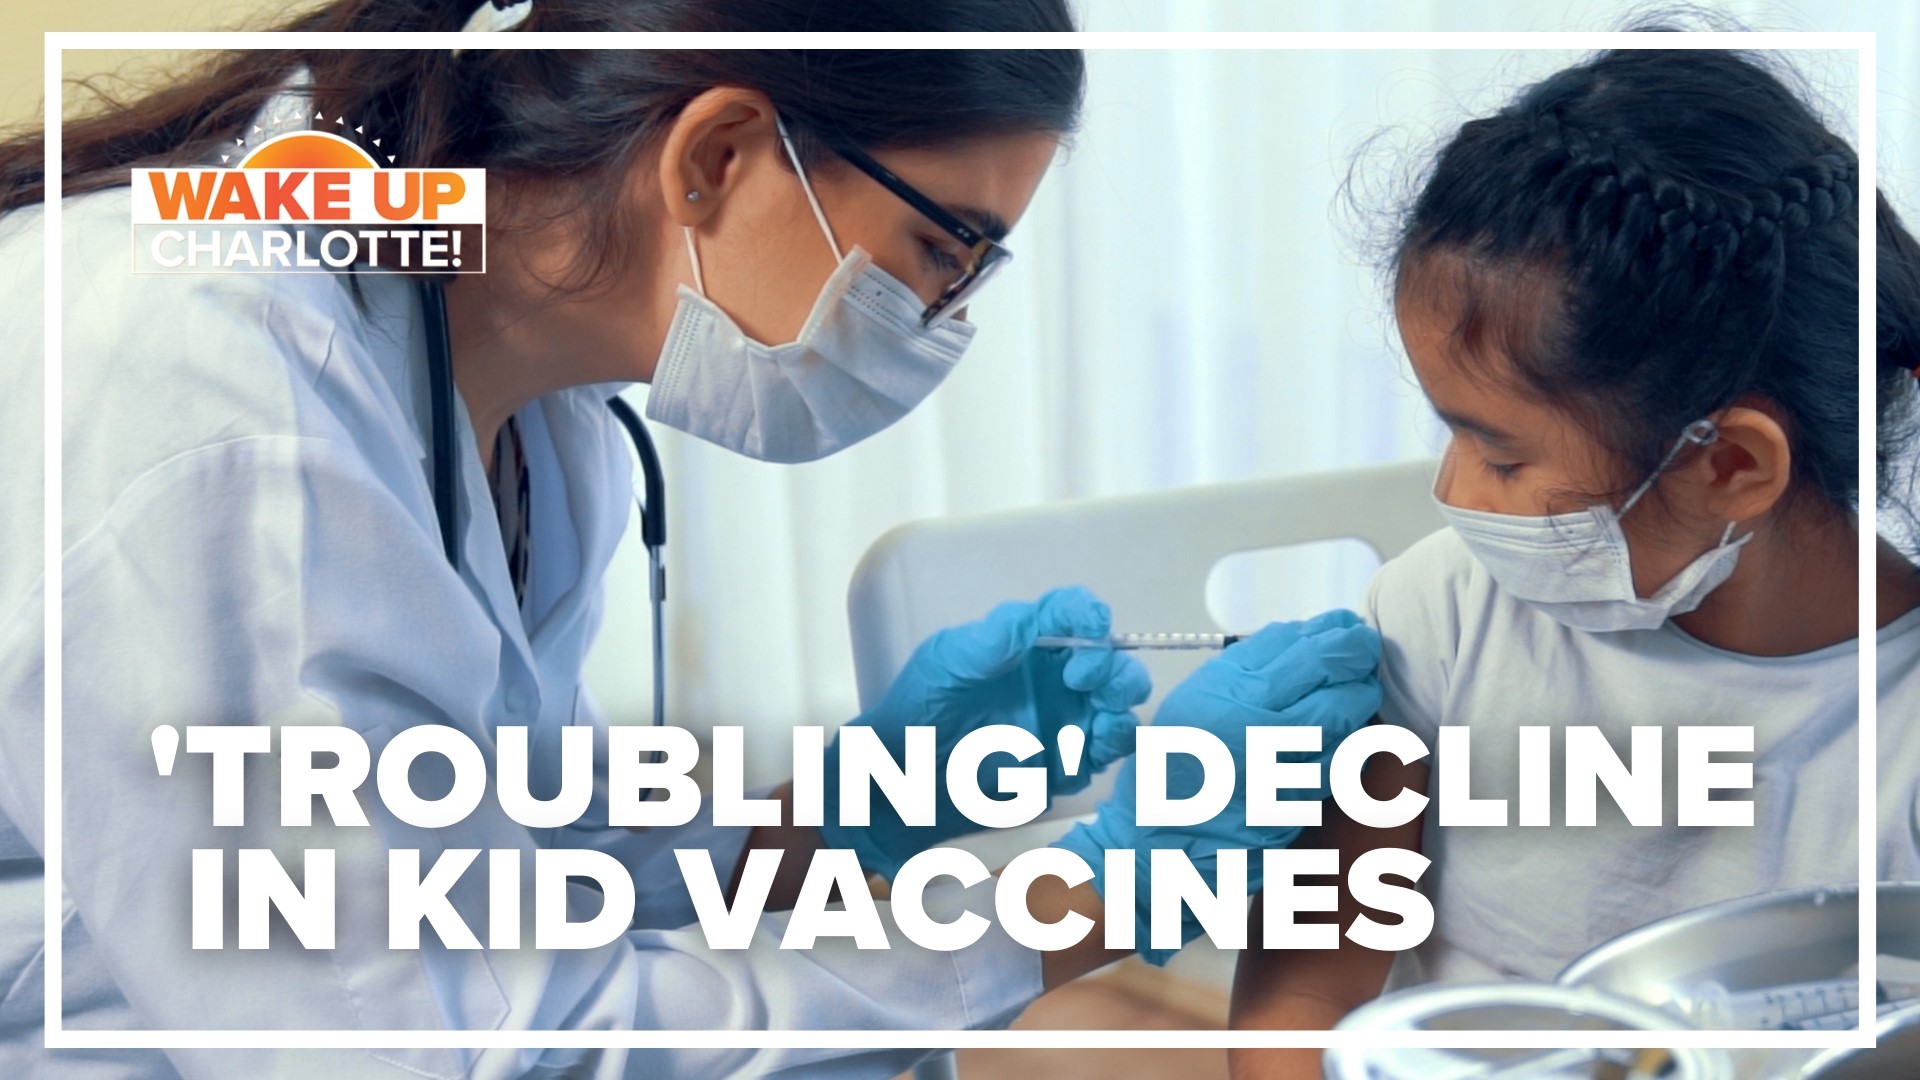 New research shows the world saw the largest drop in routine child vaccines in the last 30 years.